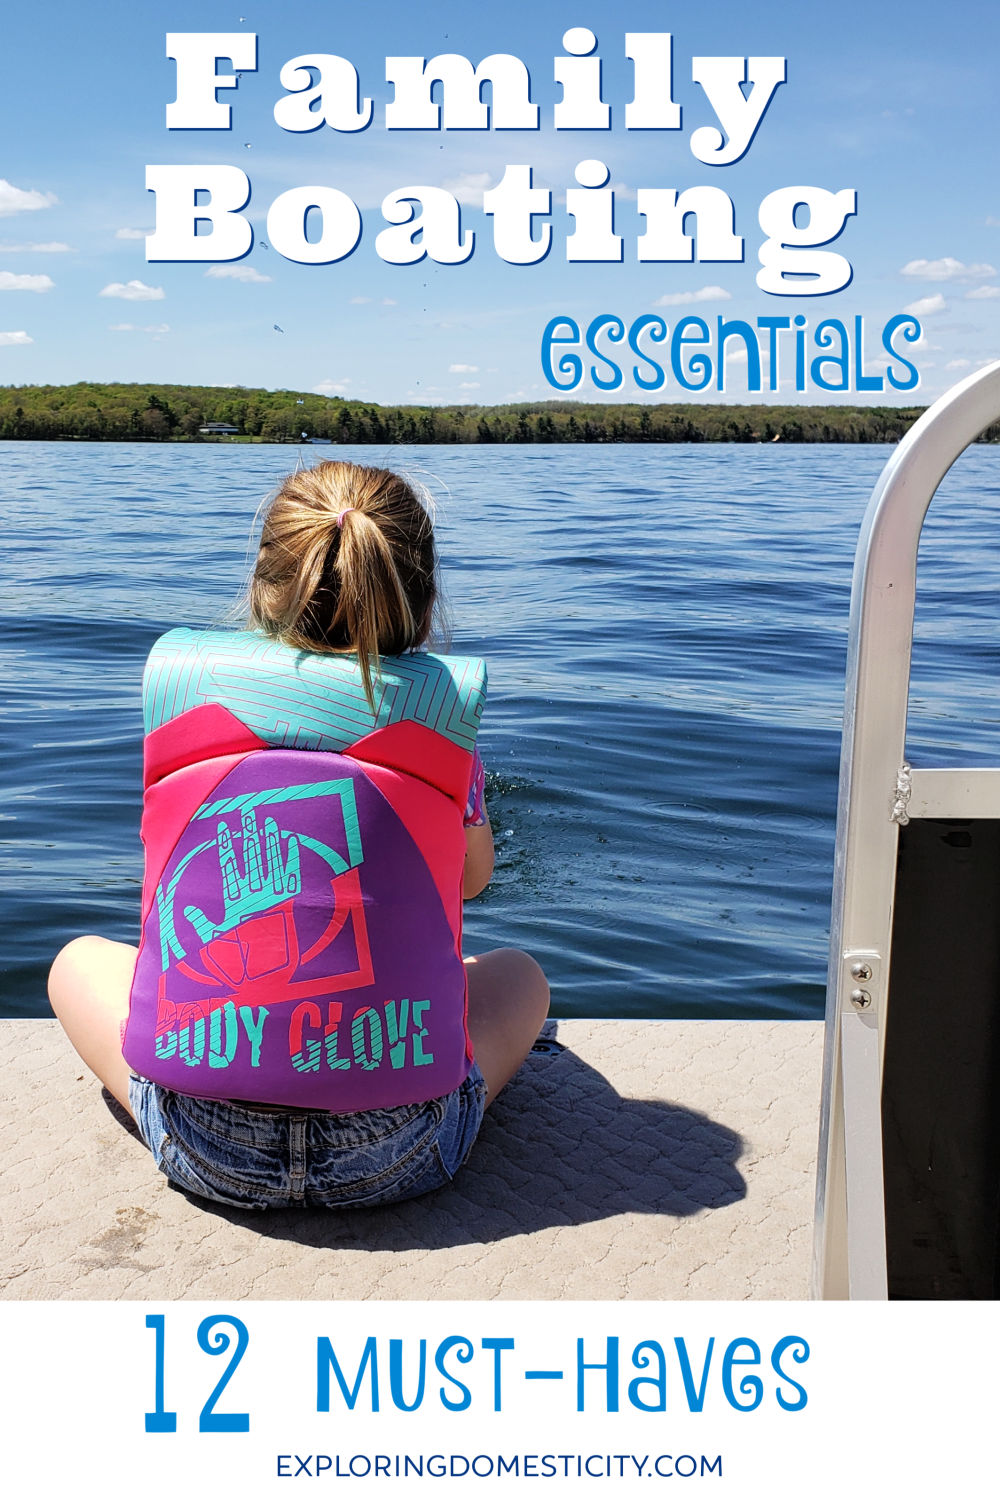 Top Five Boating Essentials You Should Have Onboard